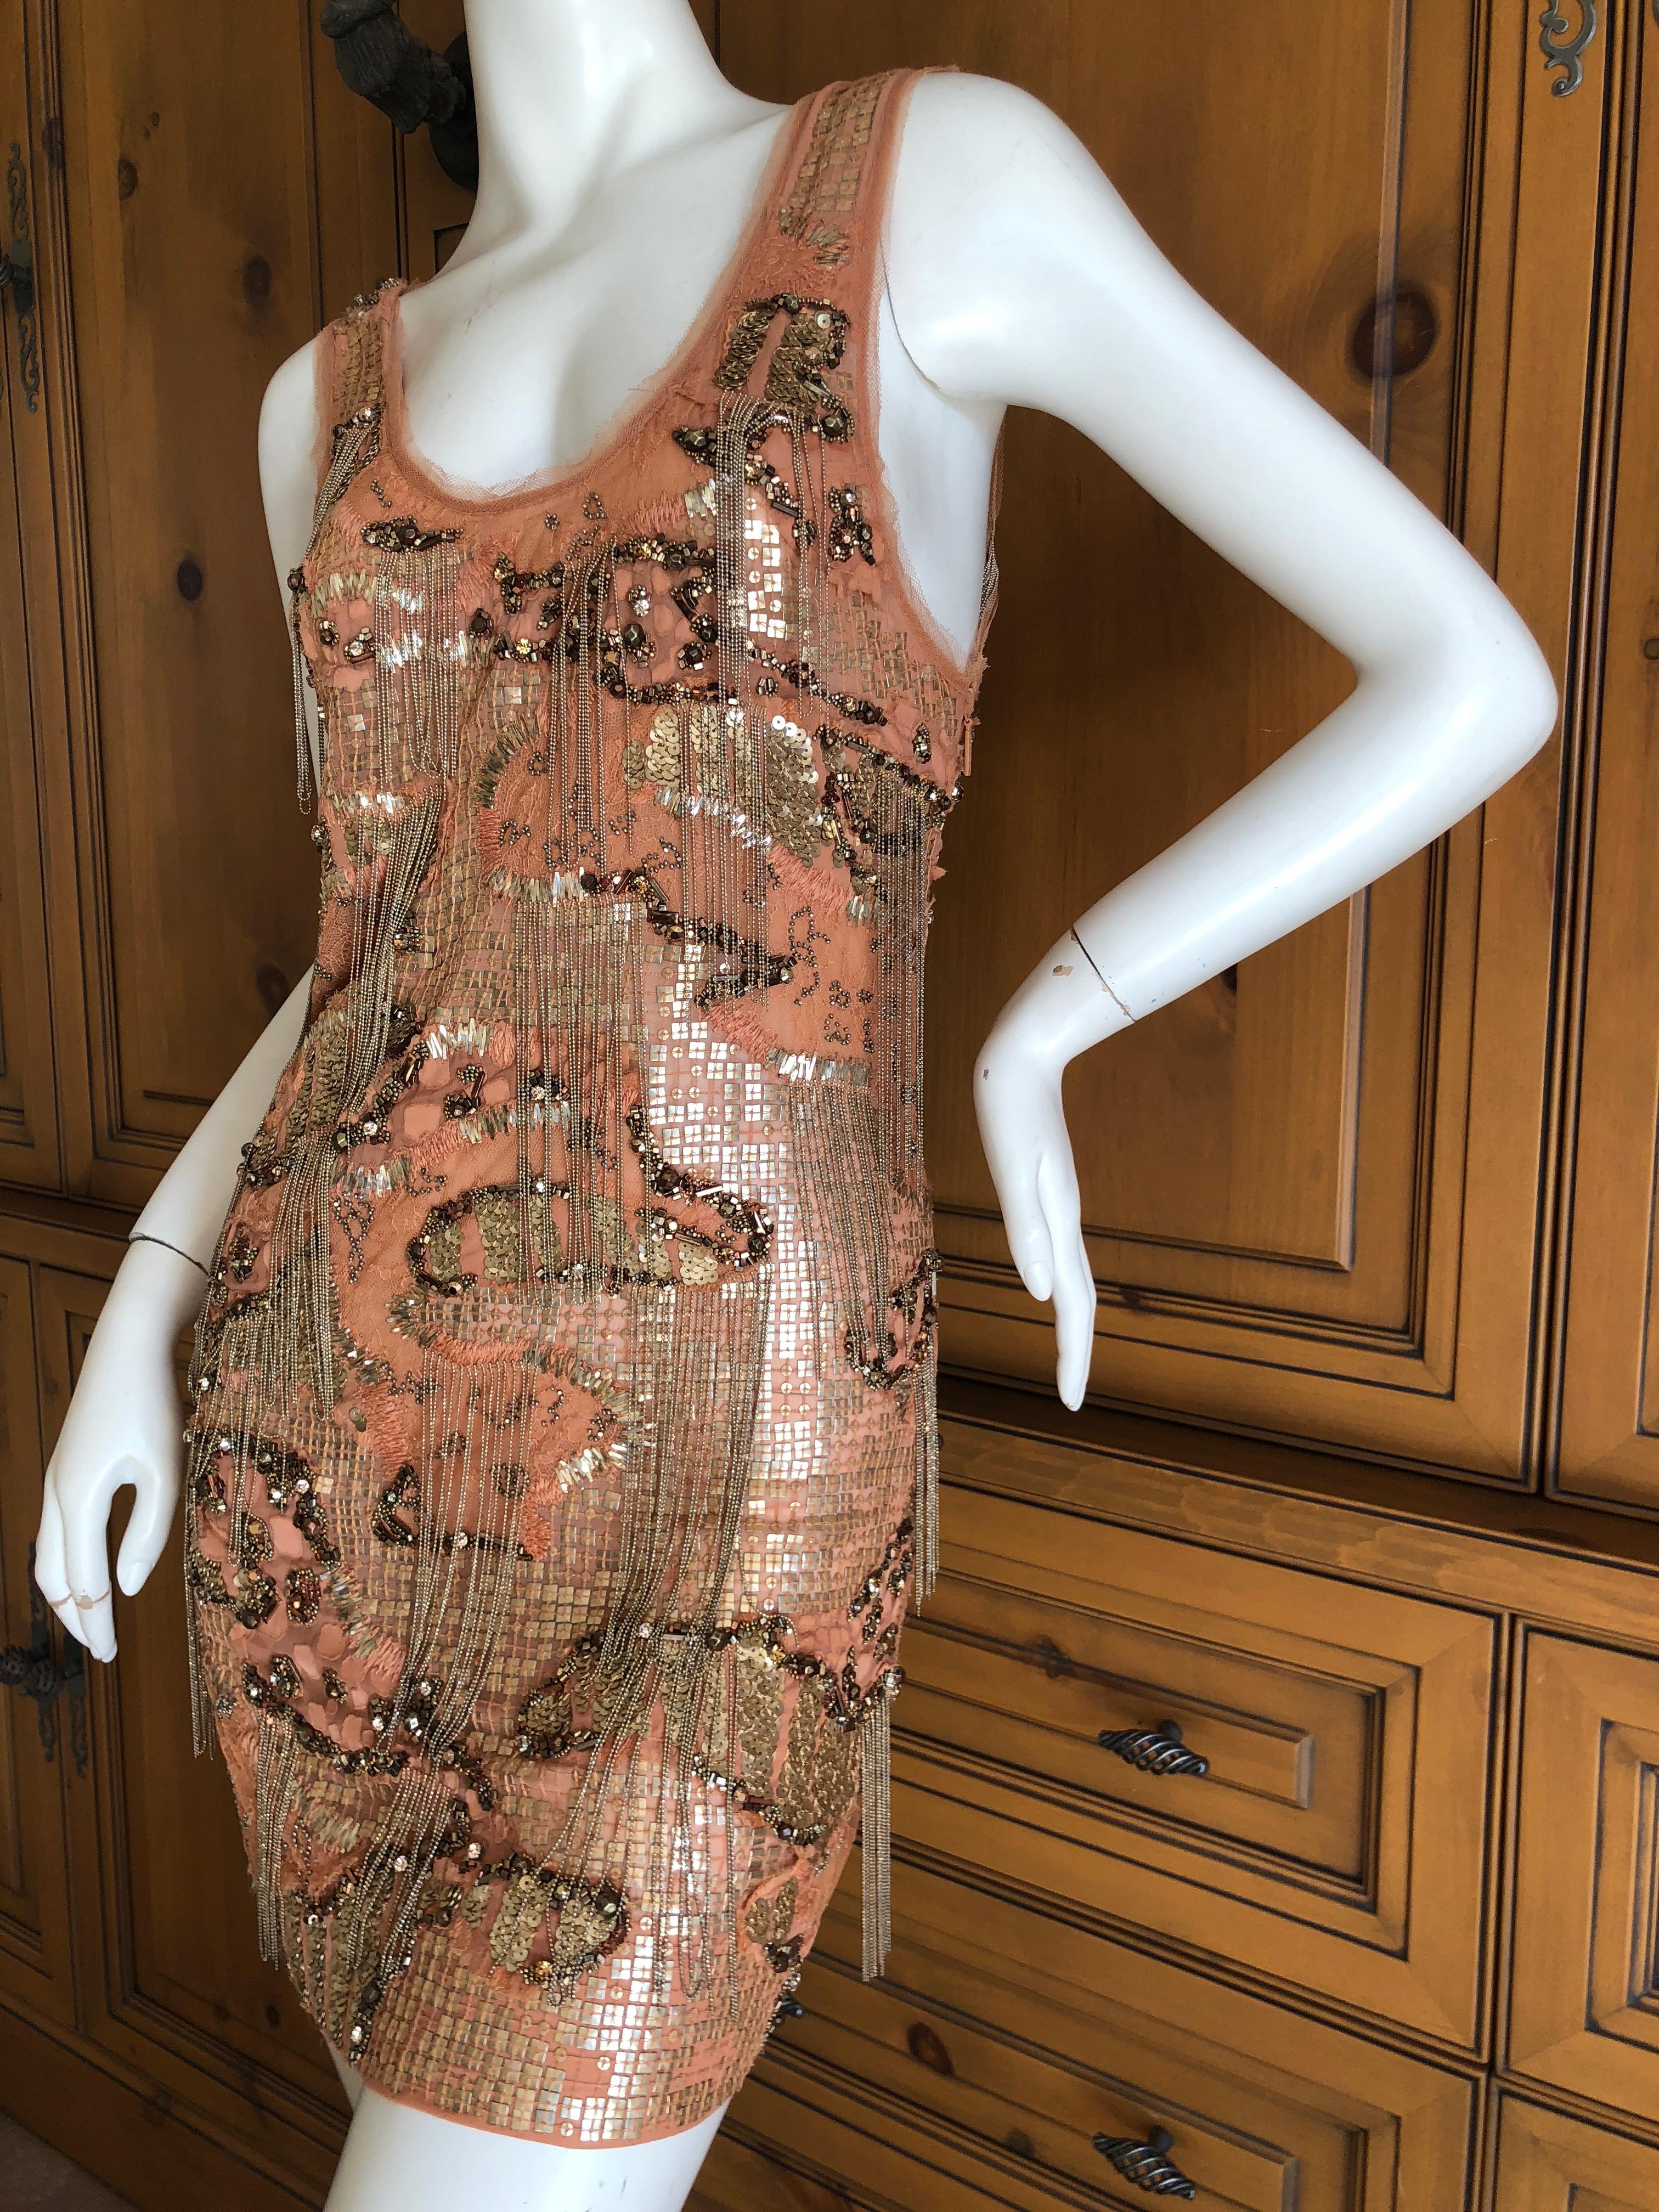 Roberto Cavalli Heavily Embellished Flapper Style Mini Dress In Excellent Condition For Sale In Cloverdale, CA